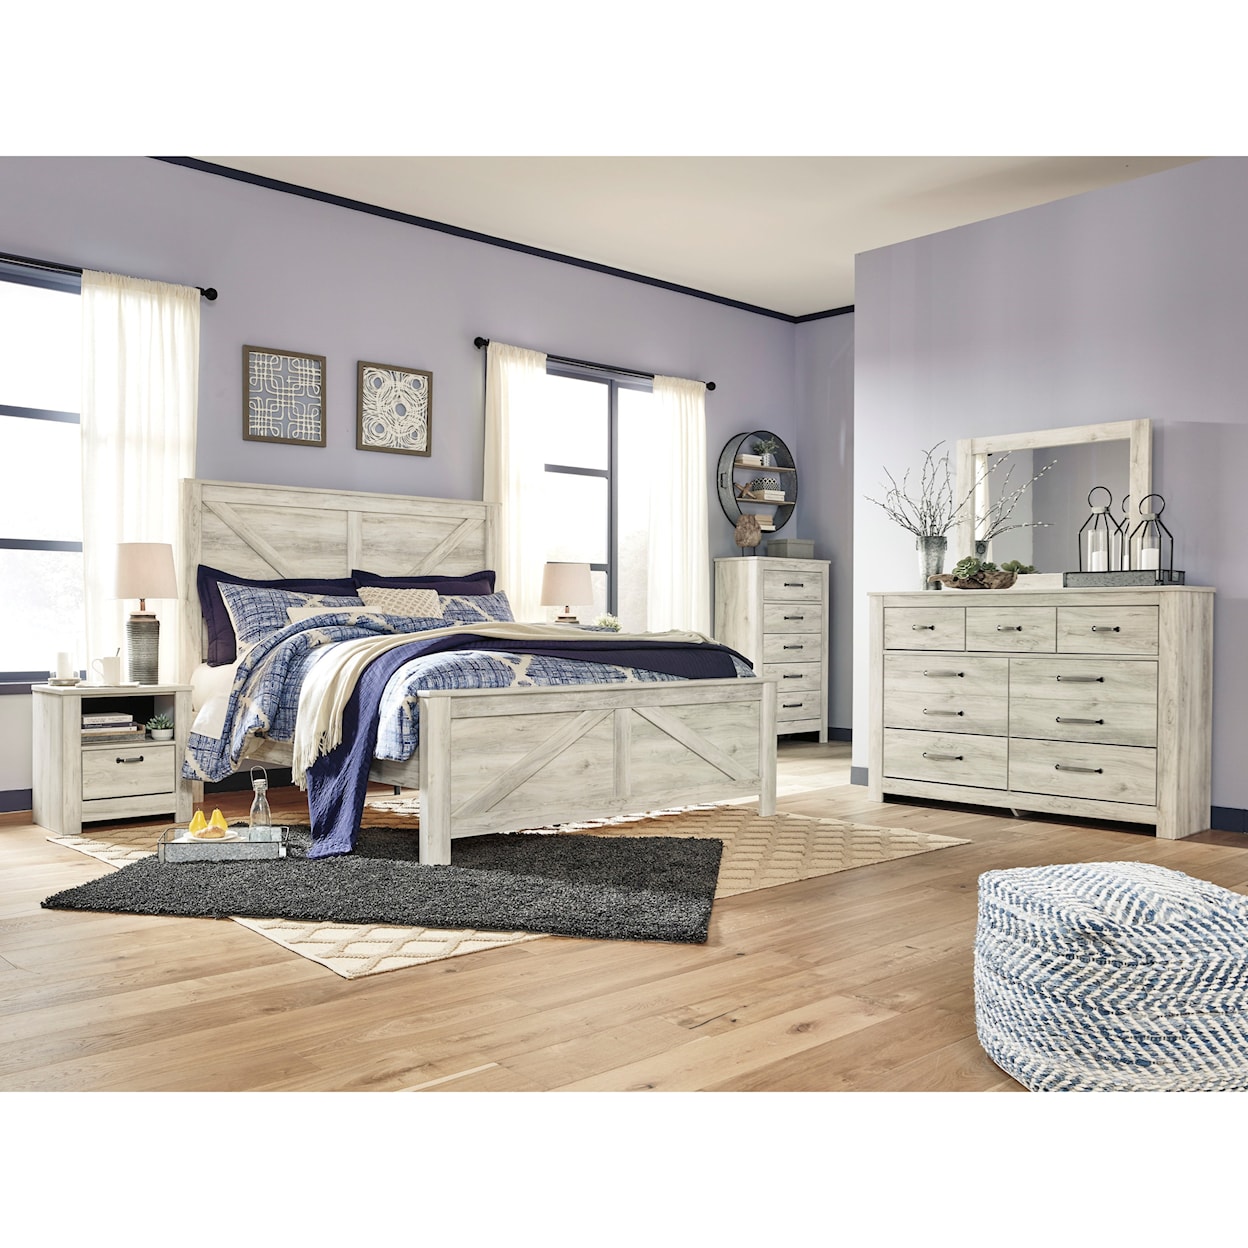 Signature Design by Ashley Bellaby King Bedroom Group